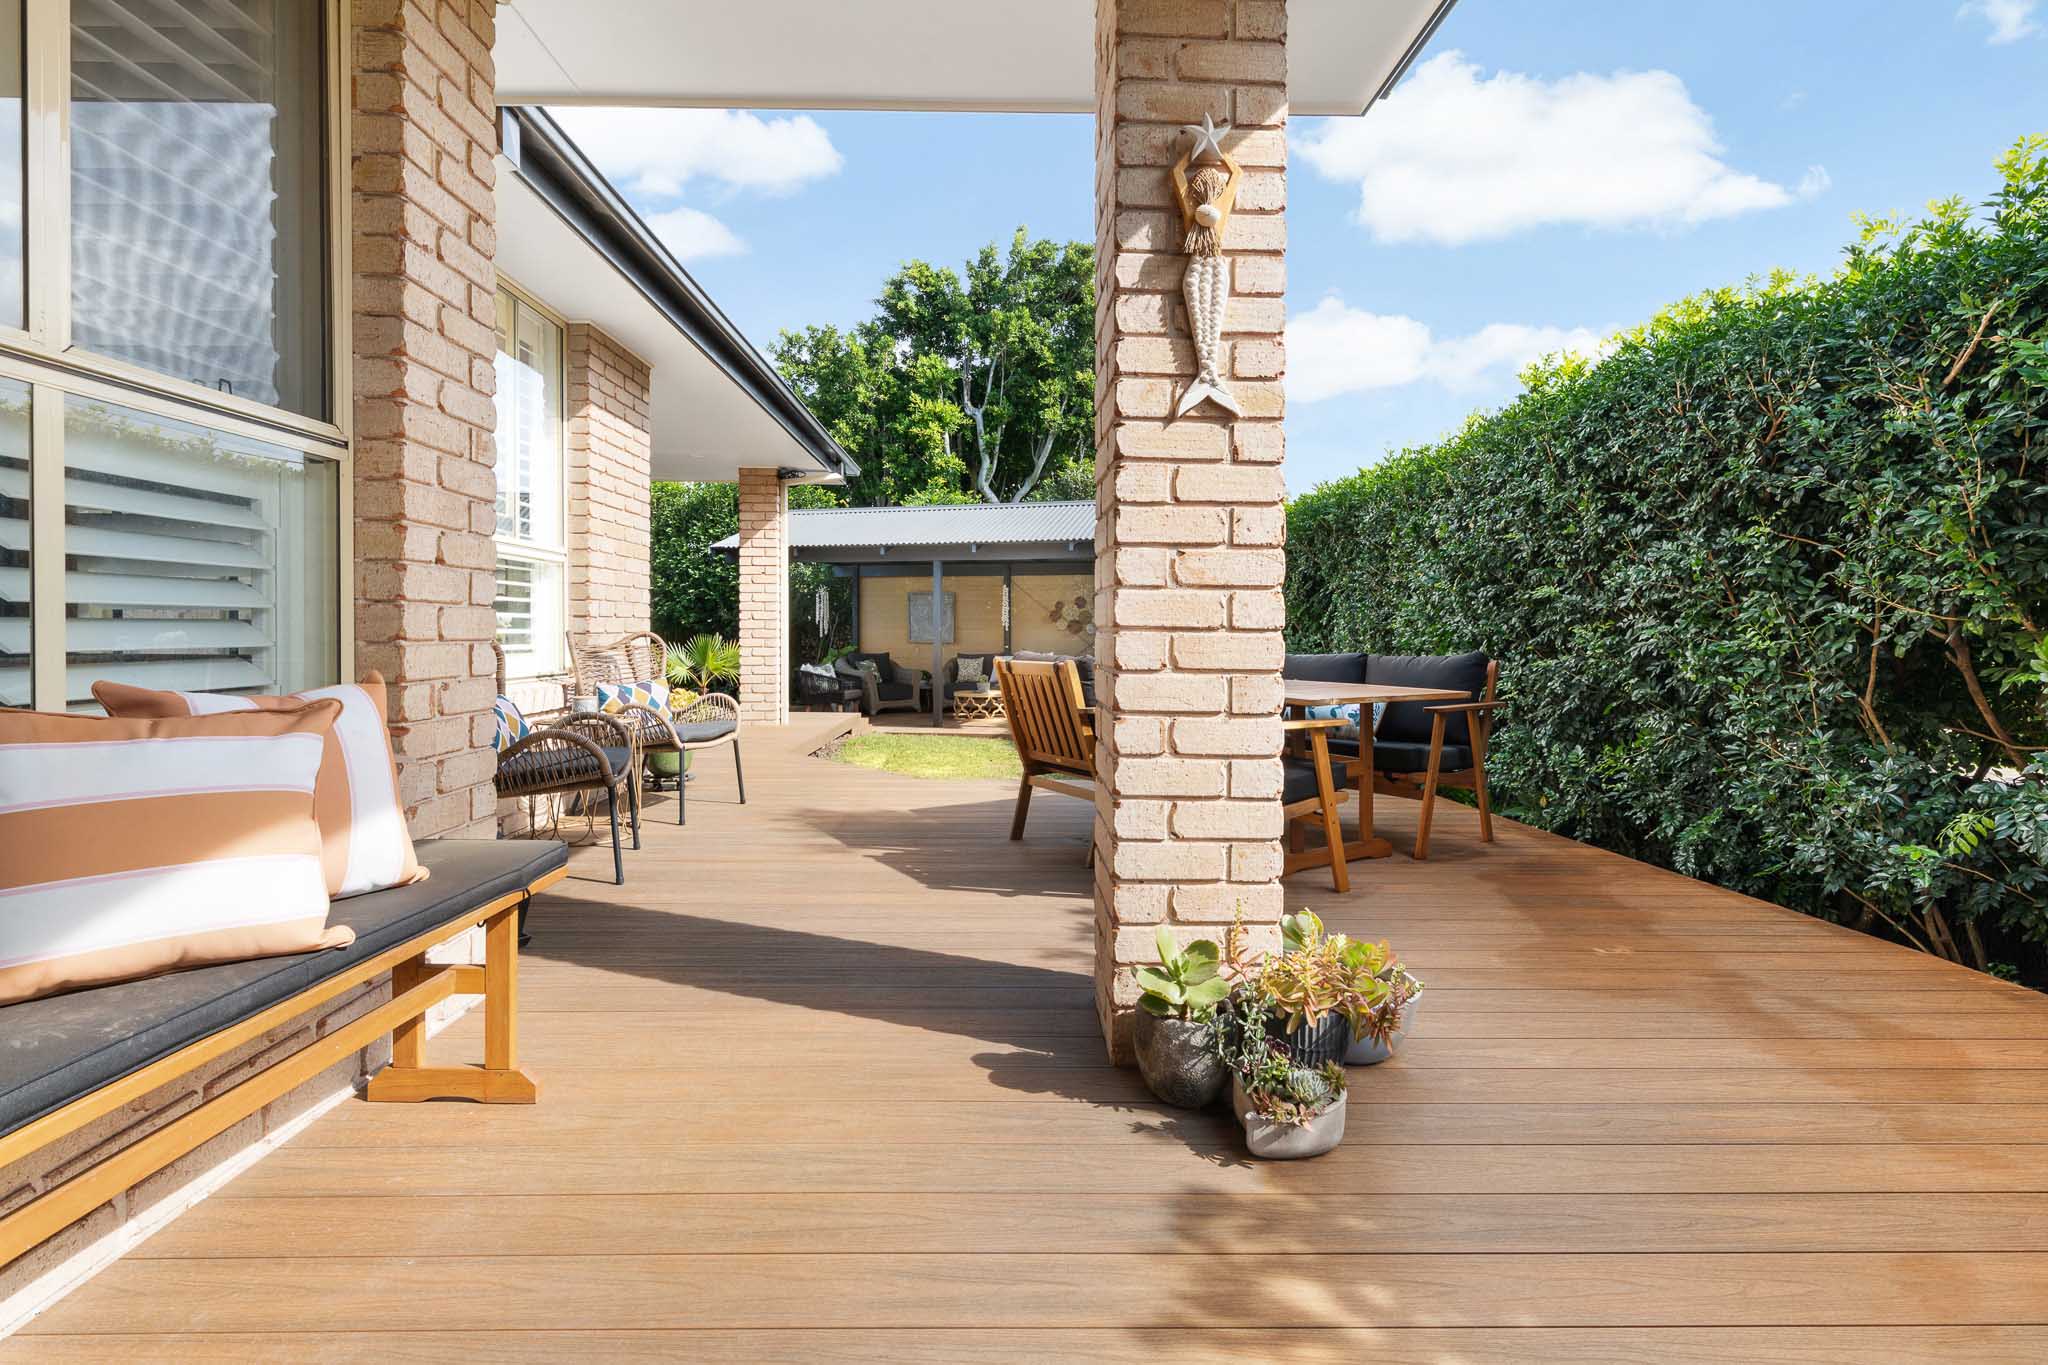 A patio alongside of a brick home, built with Brite composite decking boards